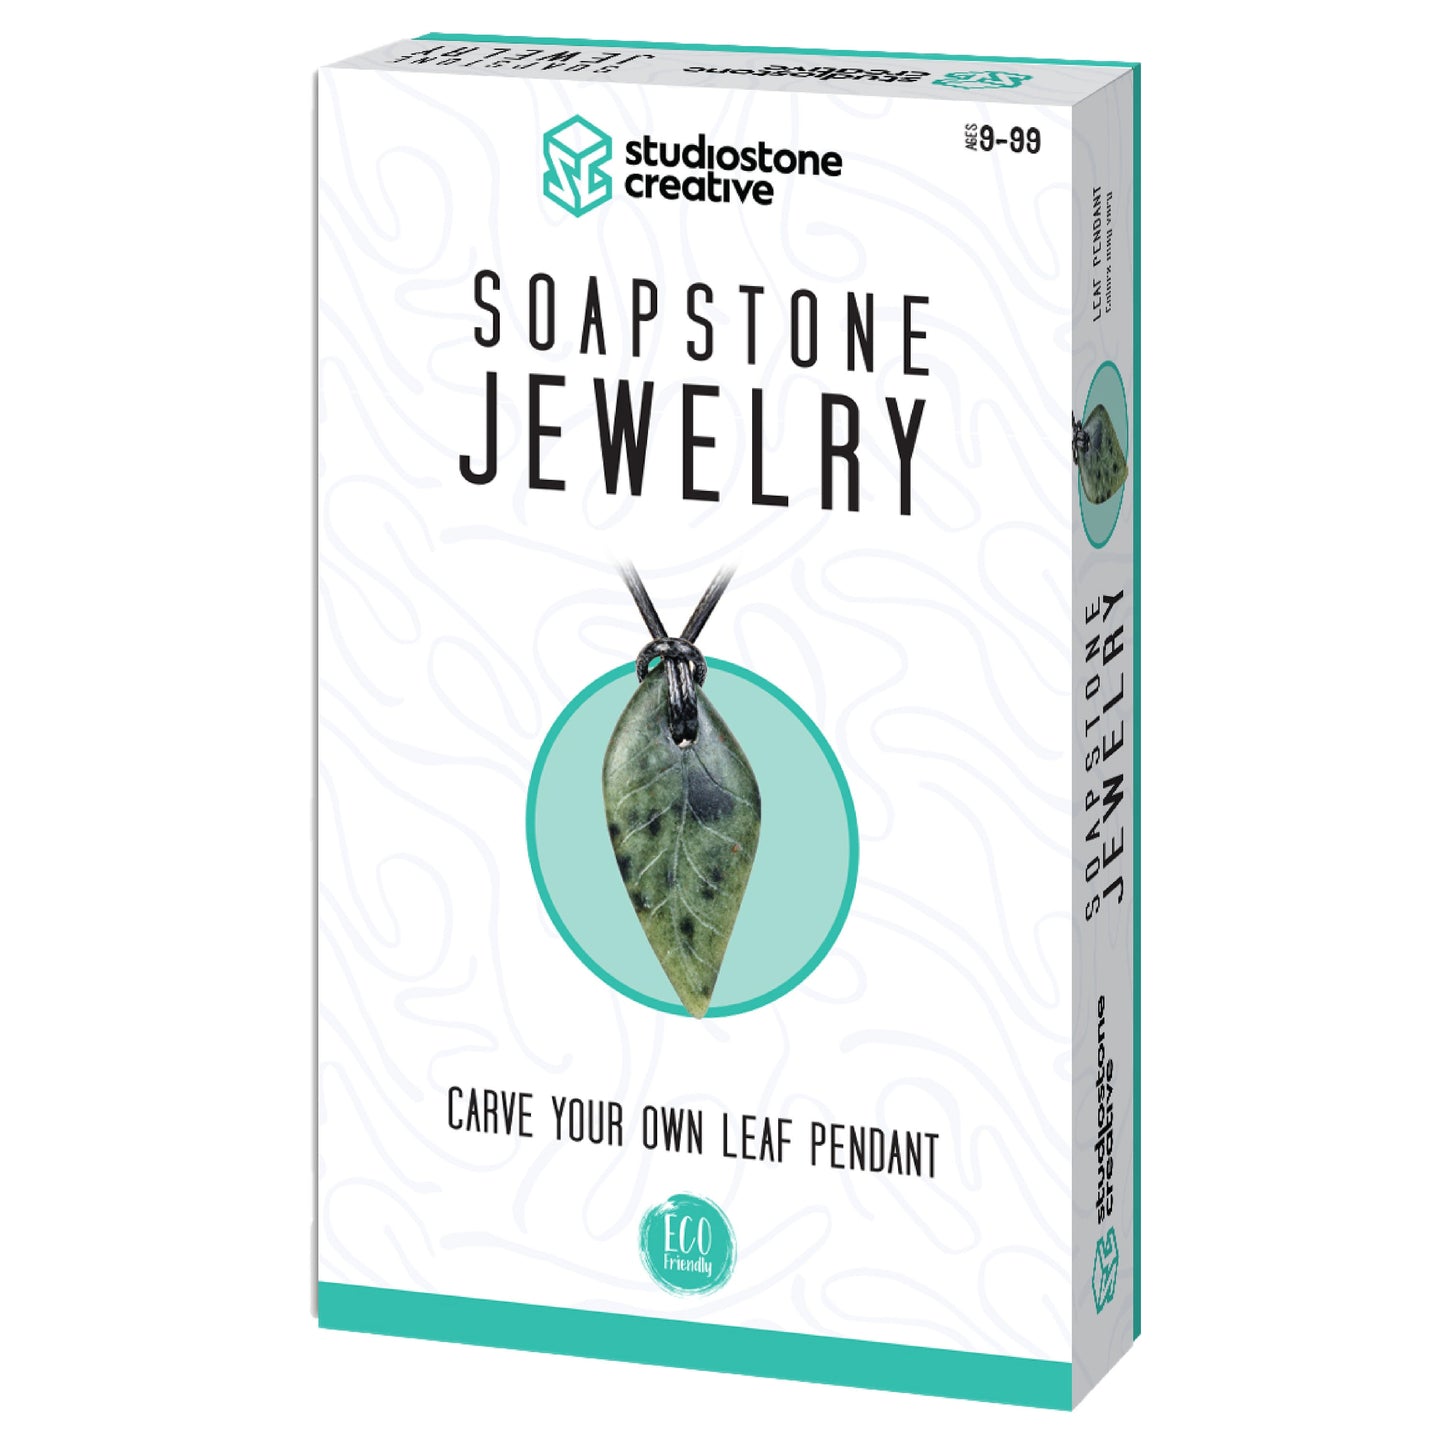 Leaf Soapstone Pendant Jewelry Kit Carving and Whittling